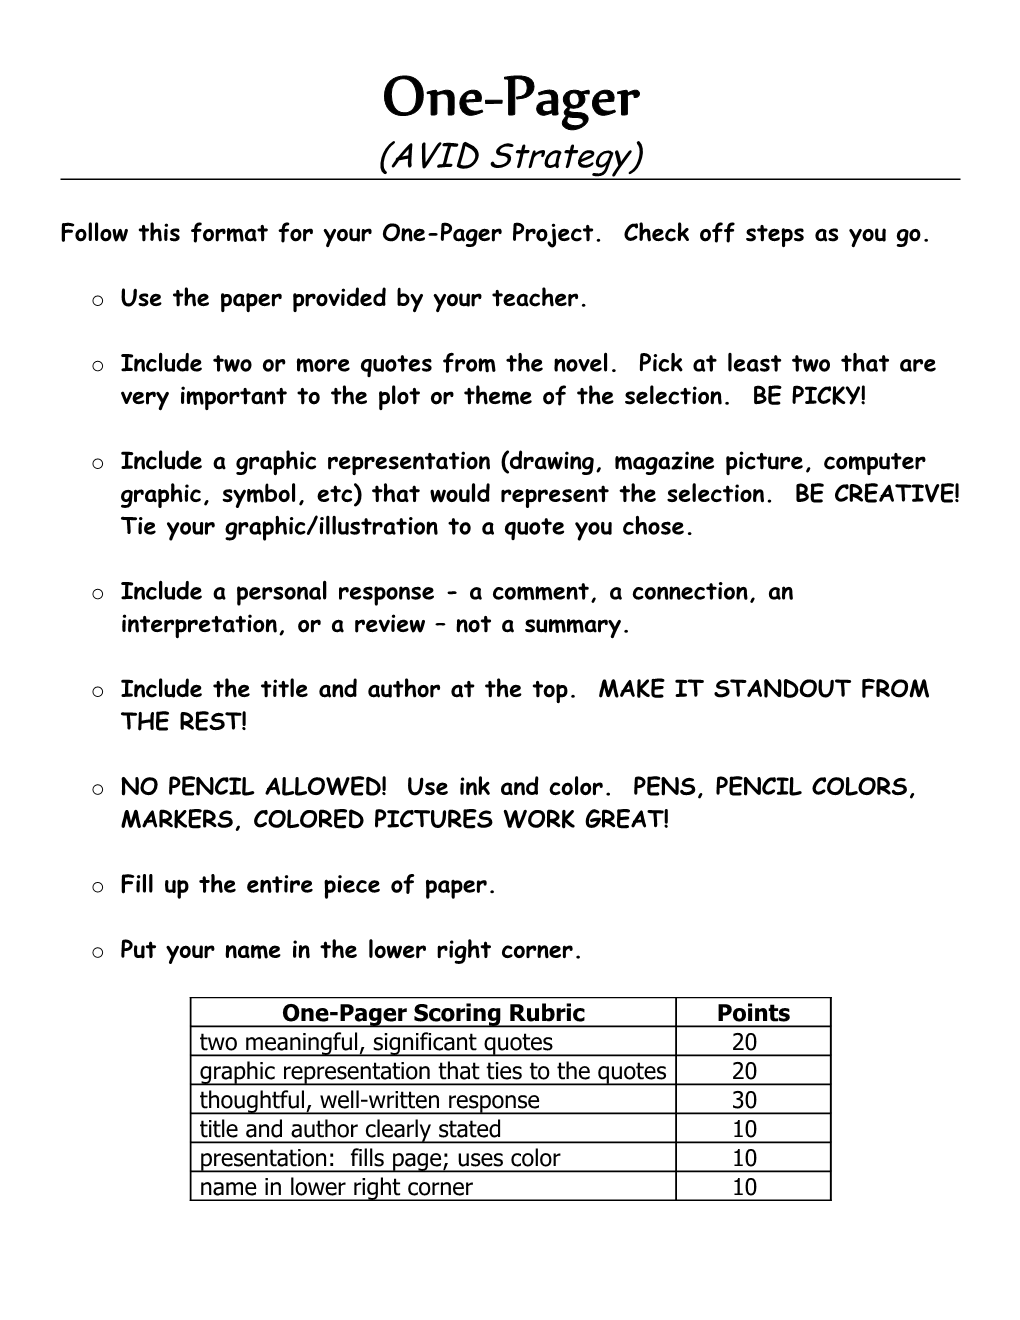 Follow This Format for Your One-Pager Project. Check Off Steps As You Go